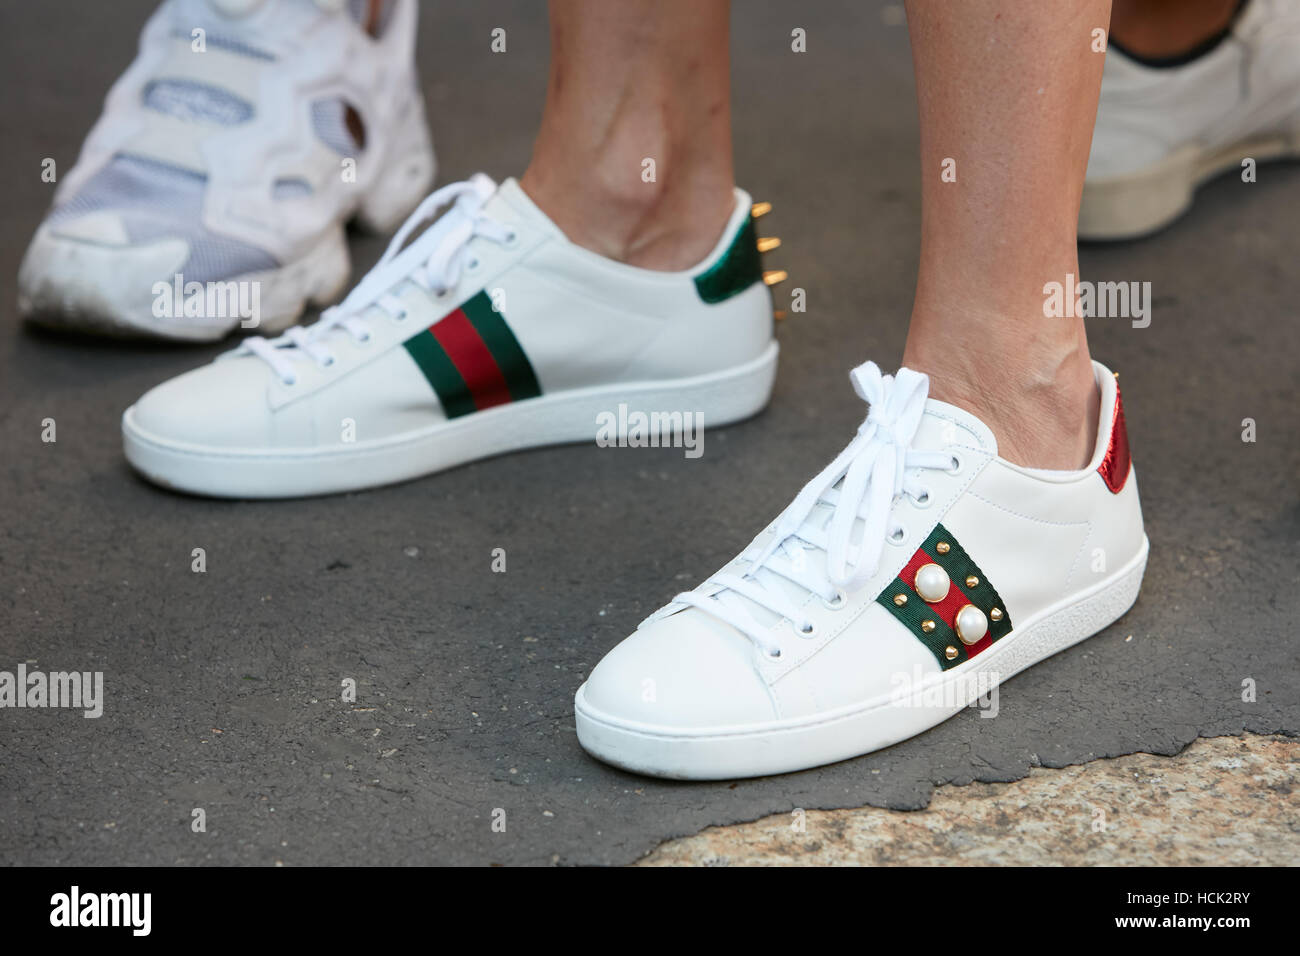 gucci sneakers style